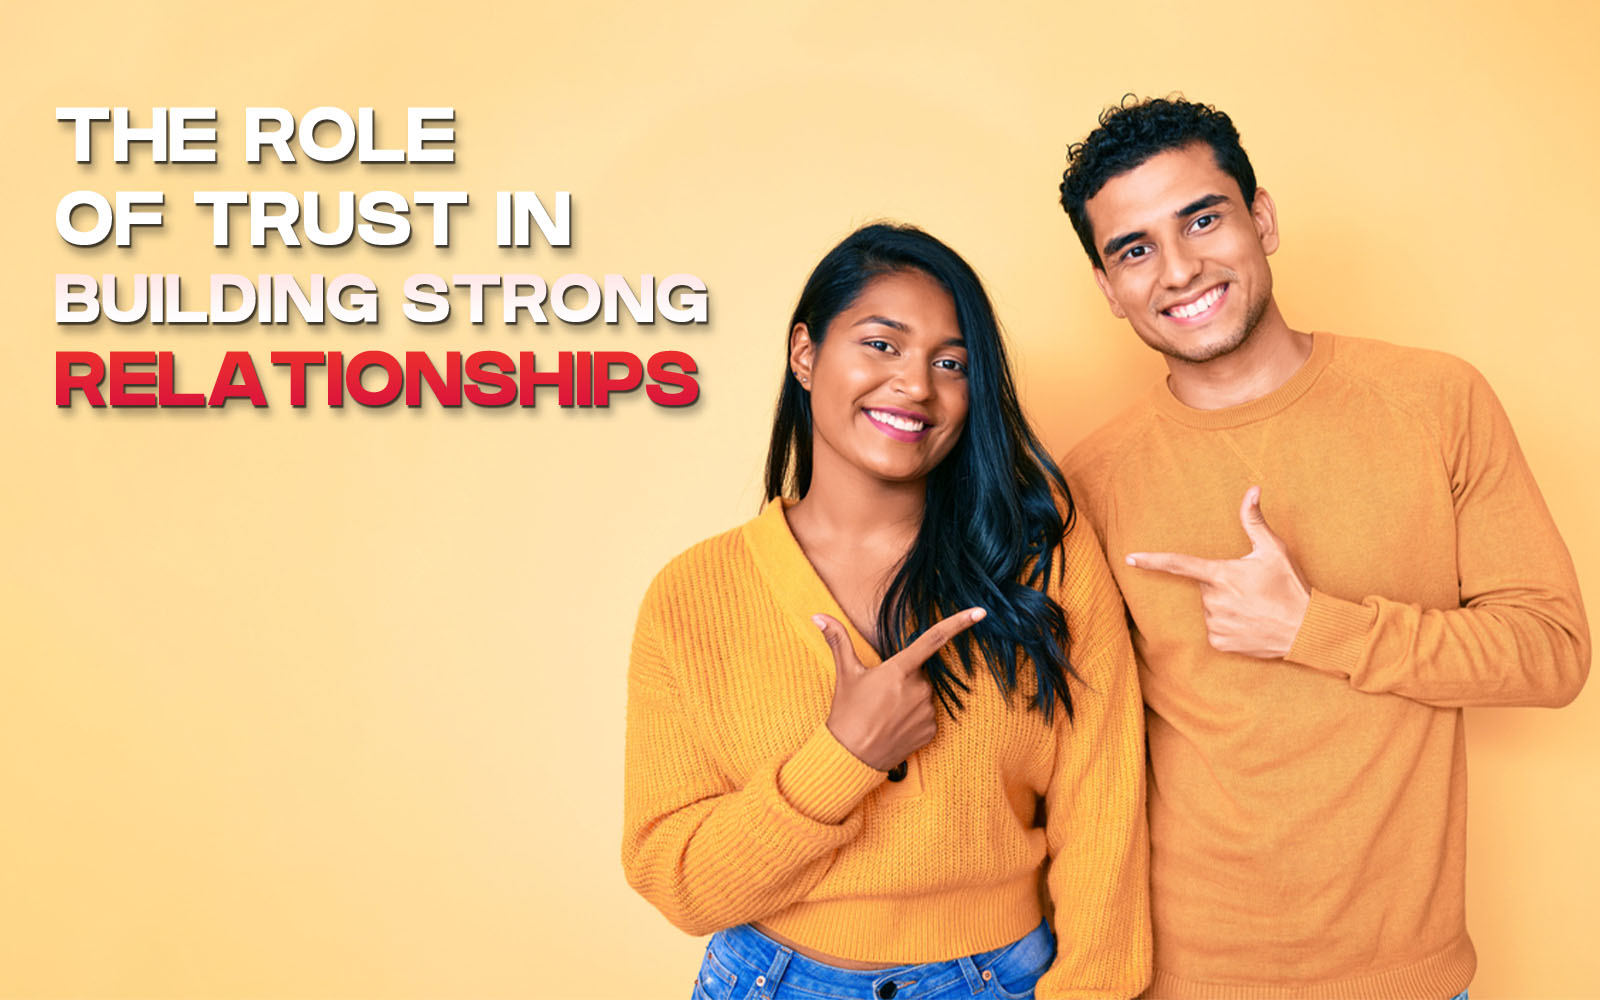 The Role of Trust in Building Strong Relationships